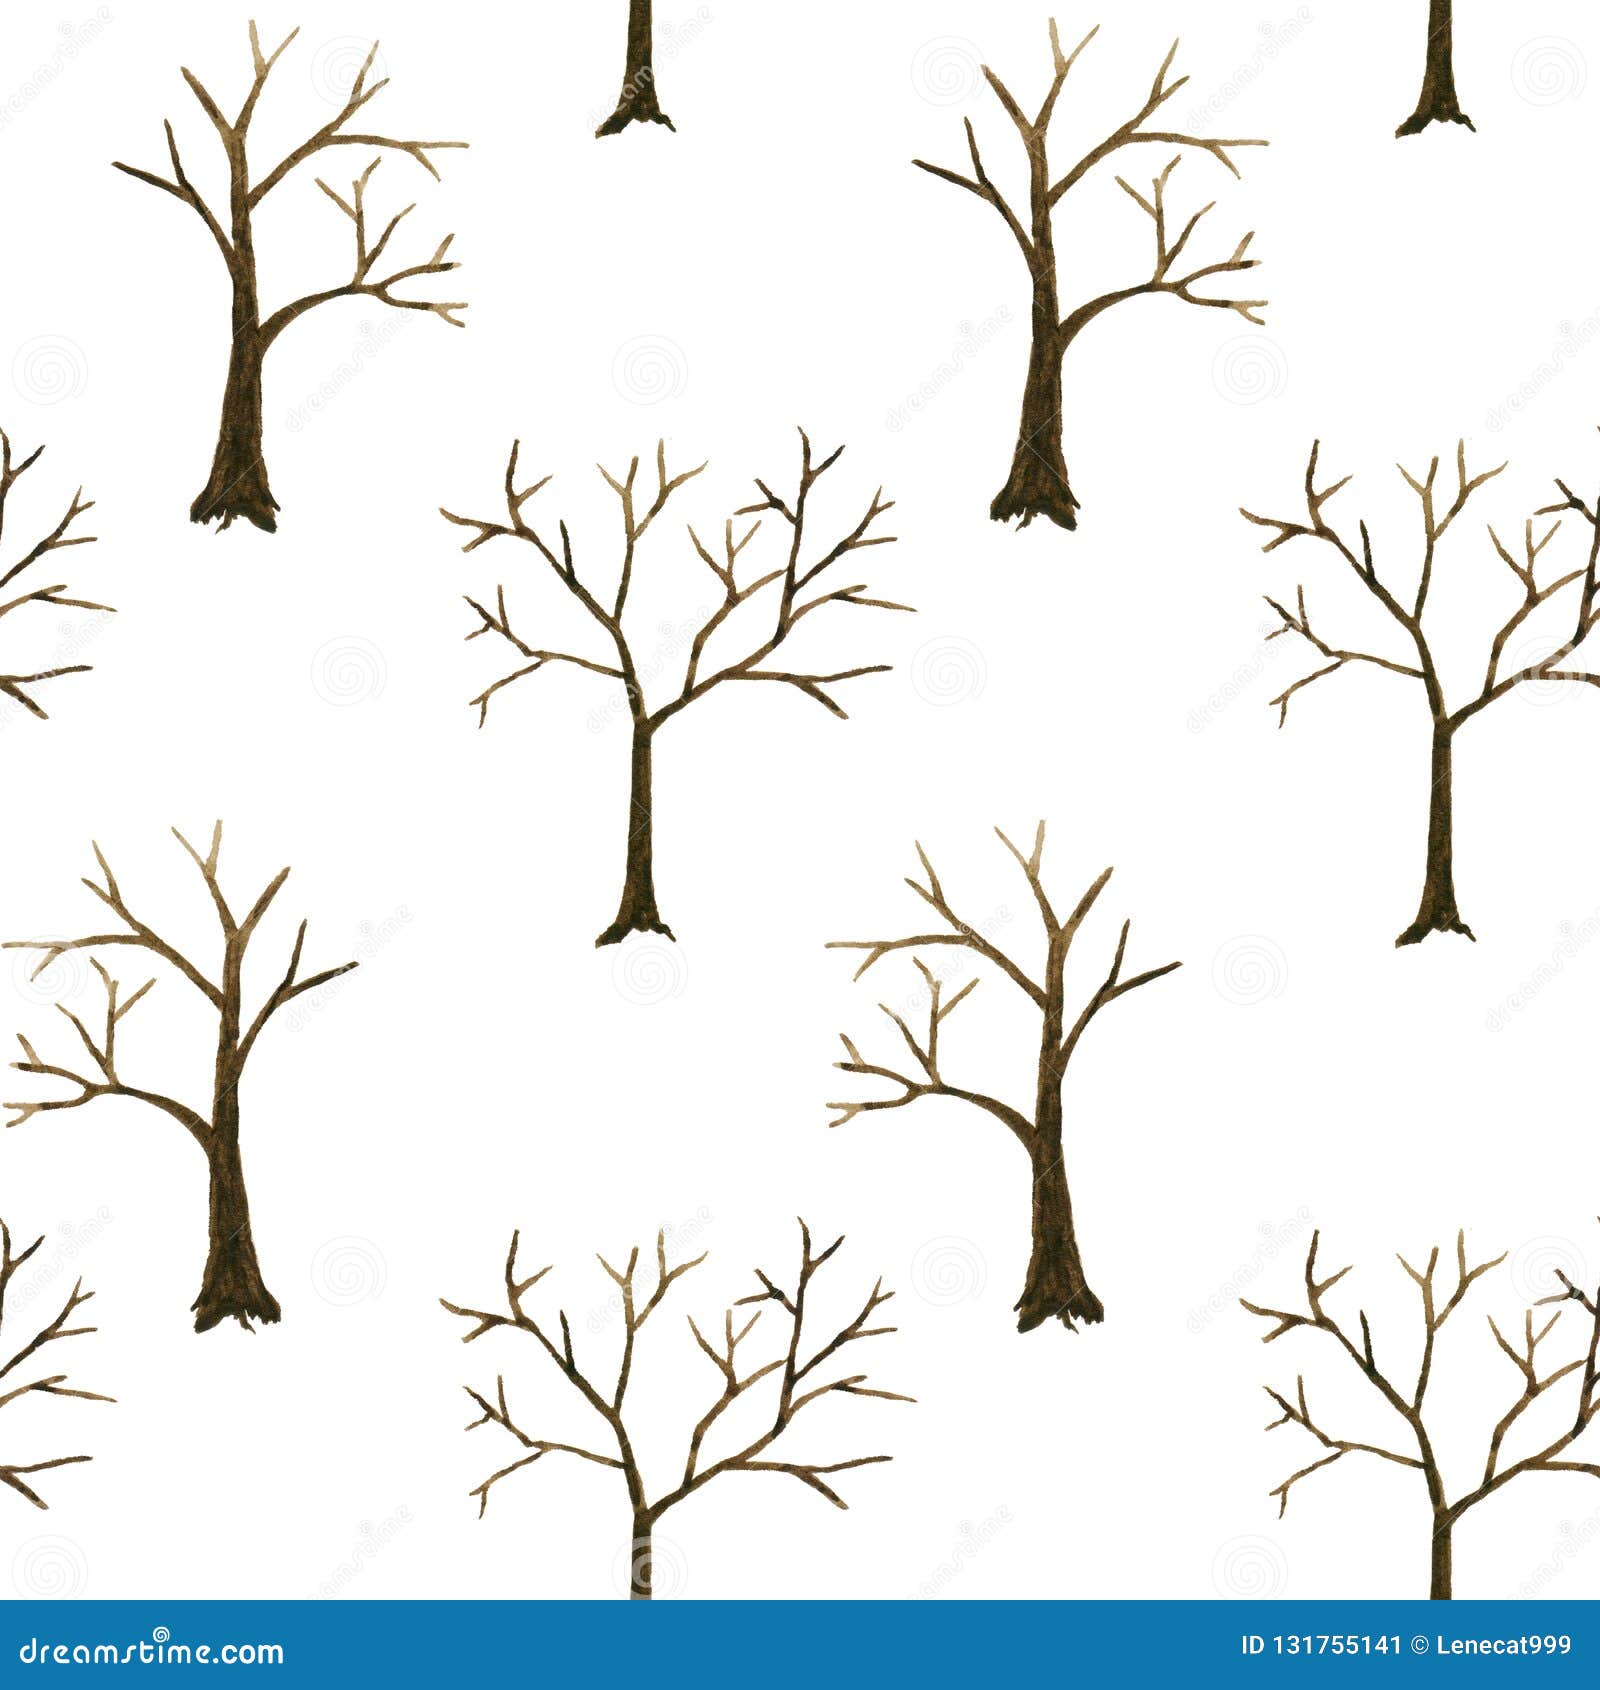 Bare Trees Silhouettes Pattern Isolated. Abstract Watercolor Hand Drawn